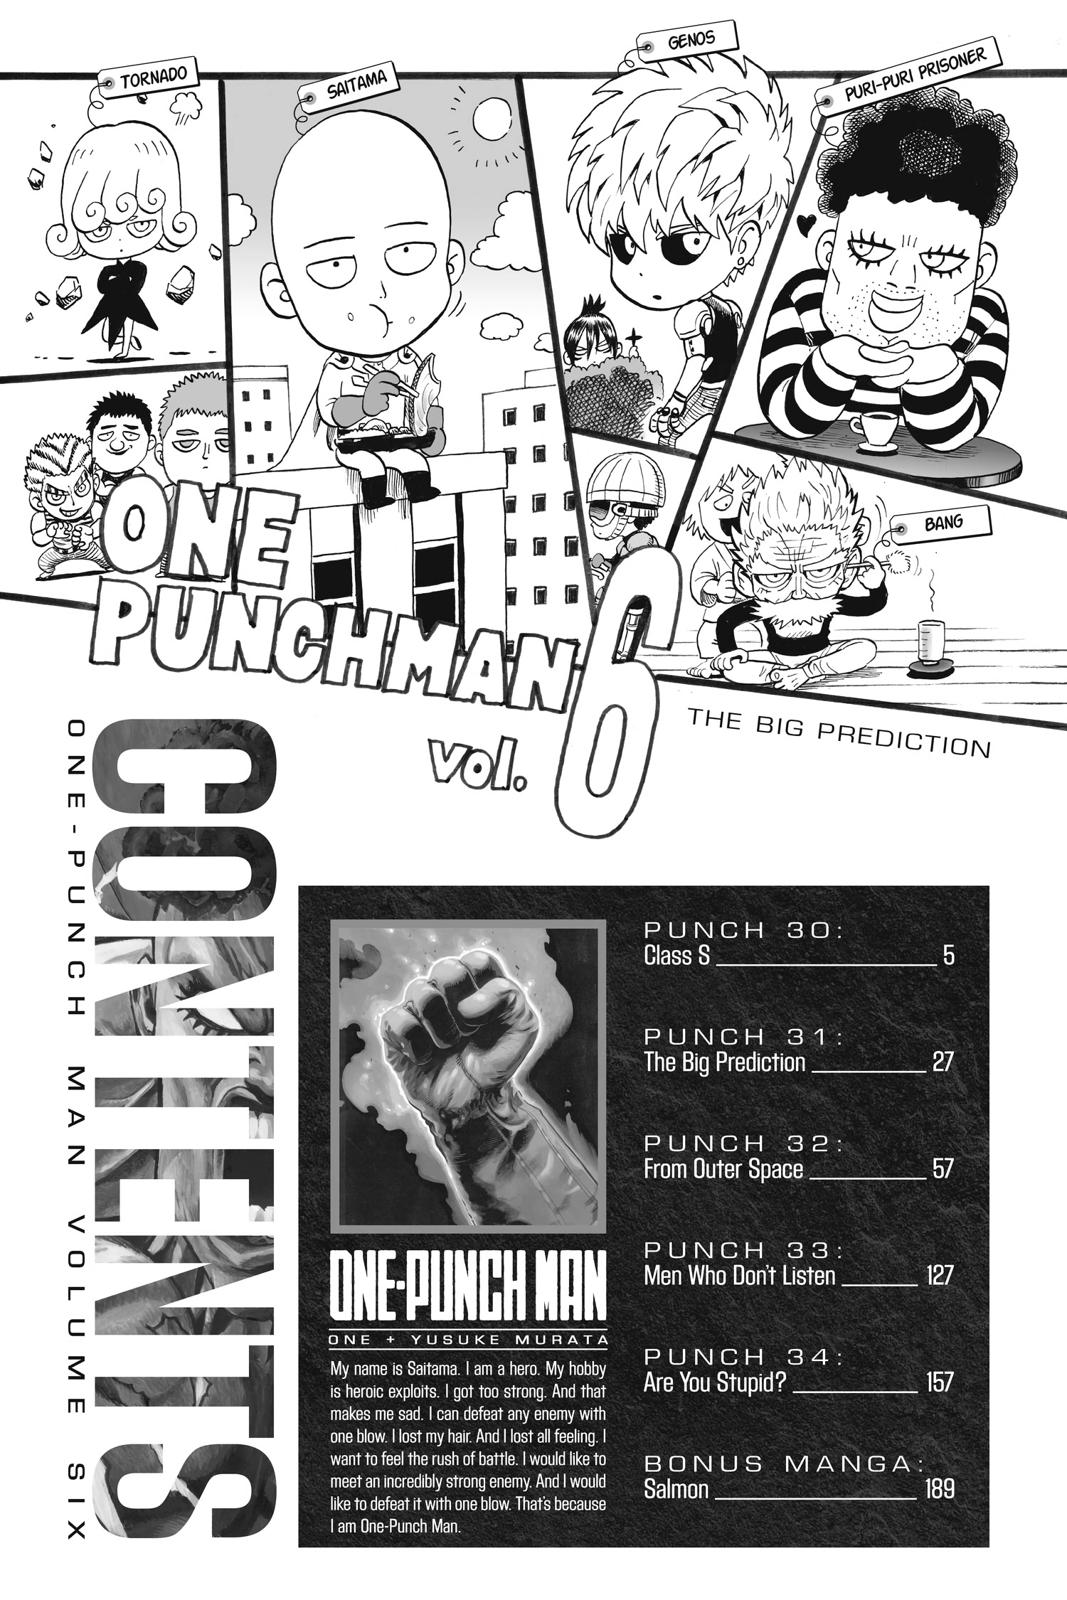 One-Punch Man, Punch 30 image 05